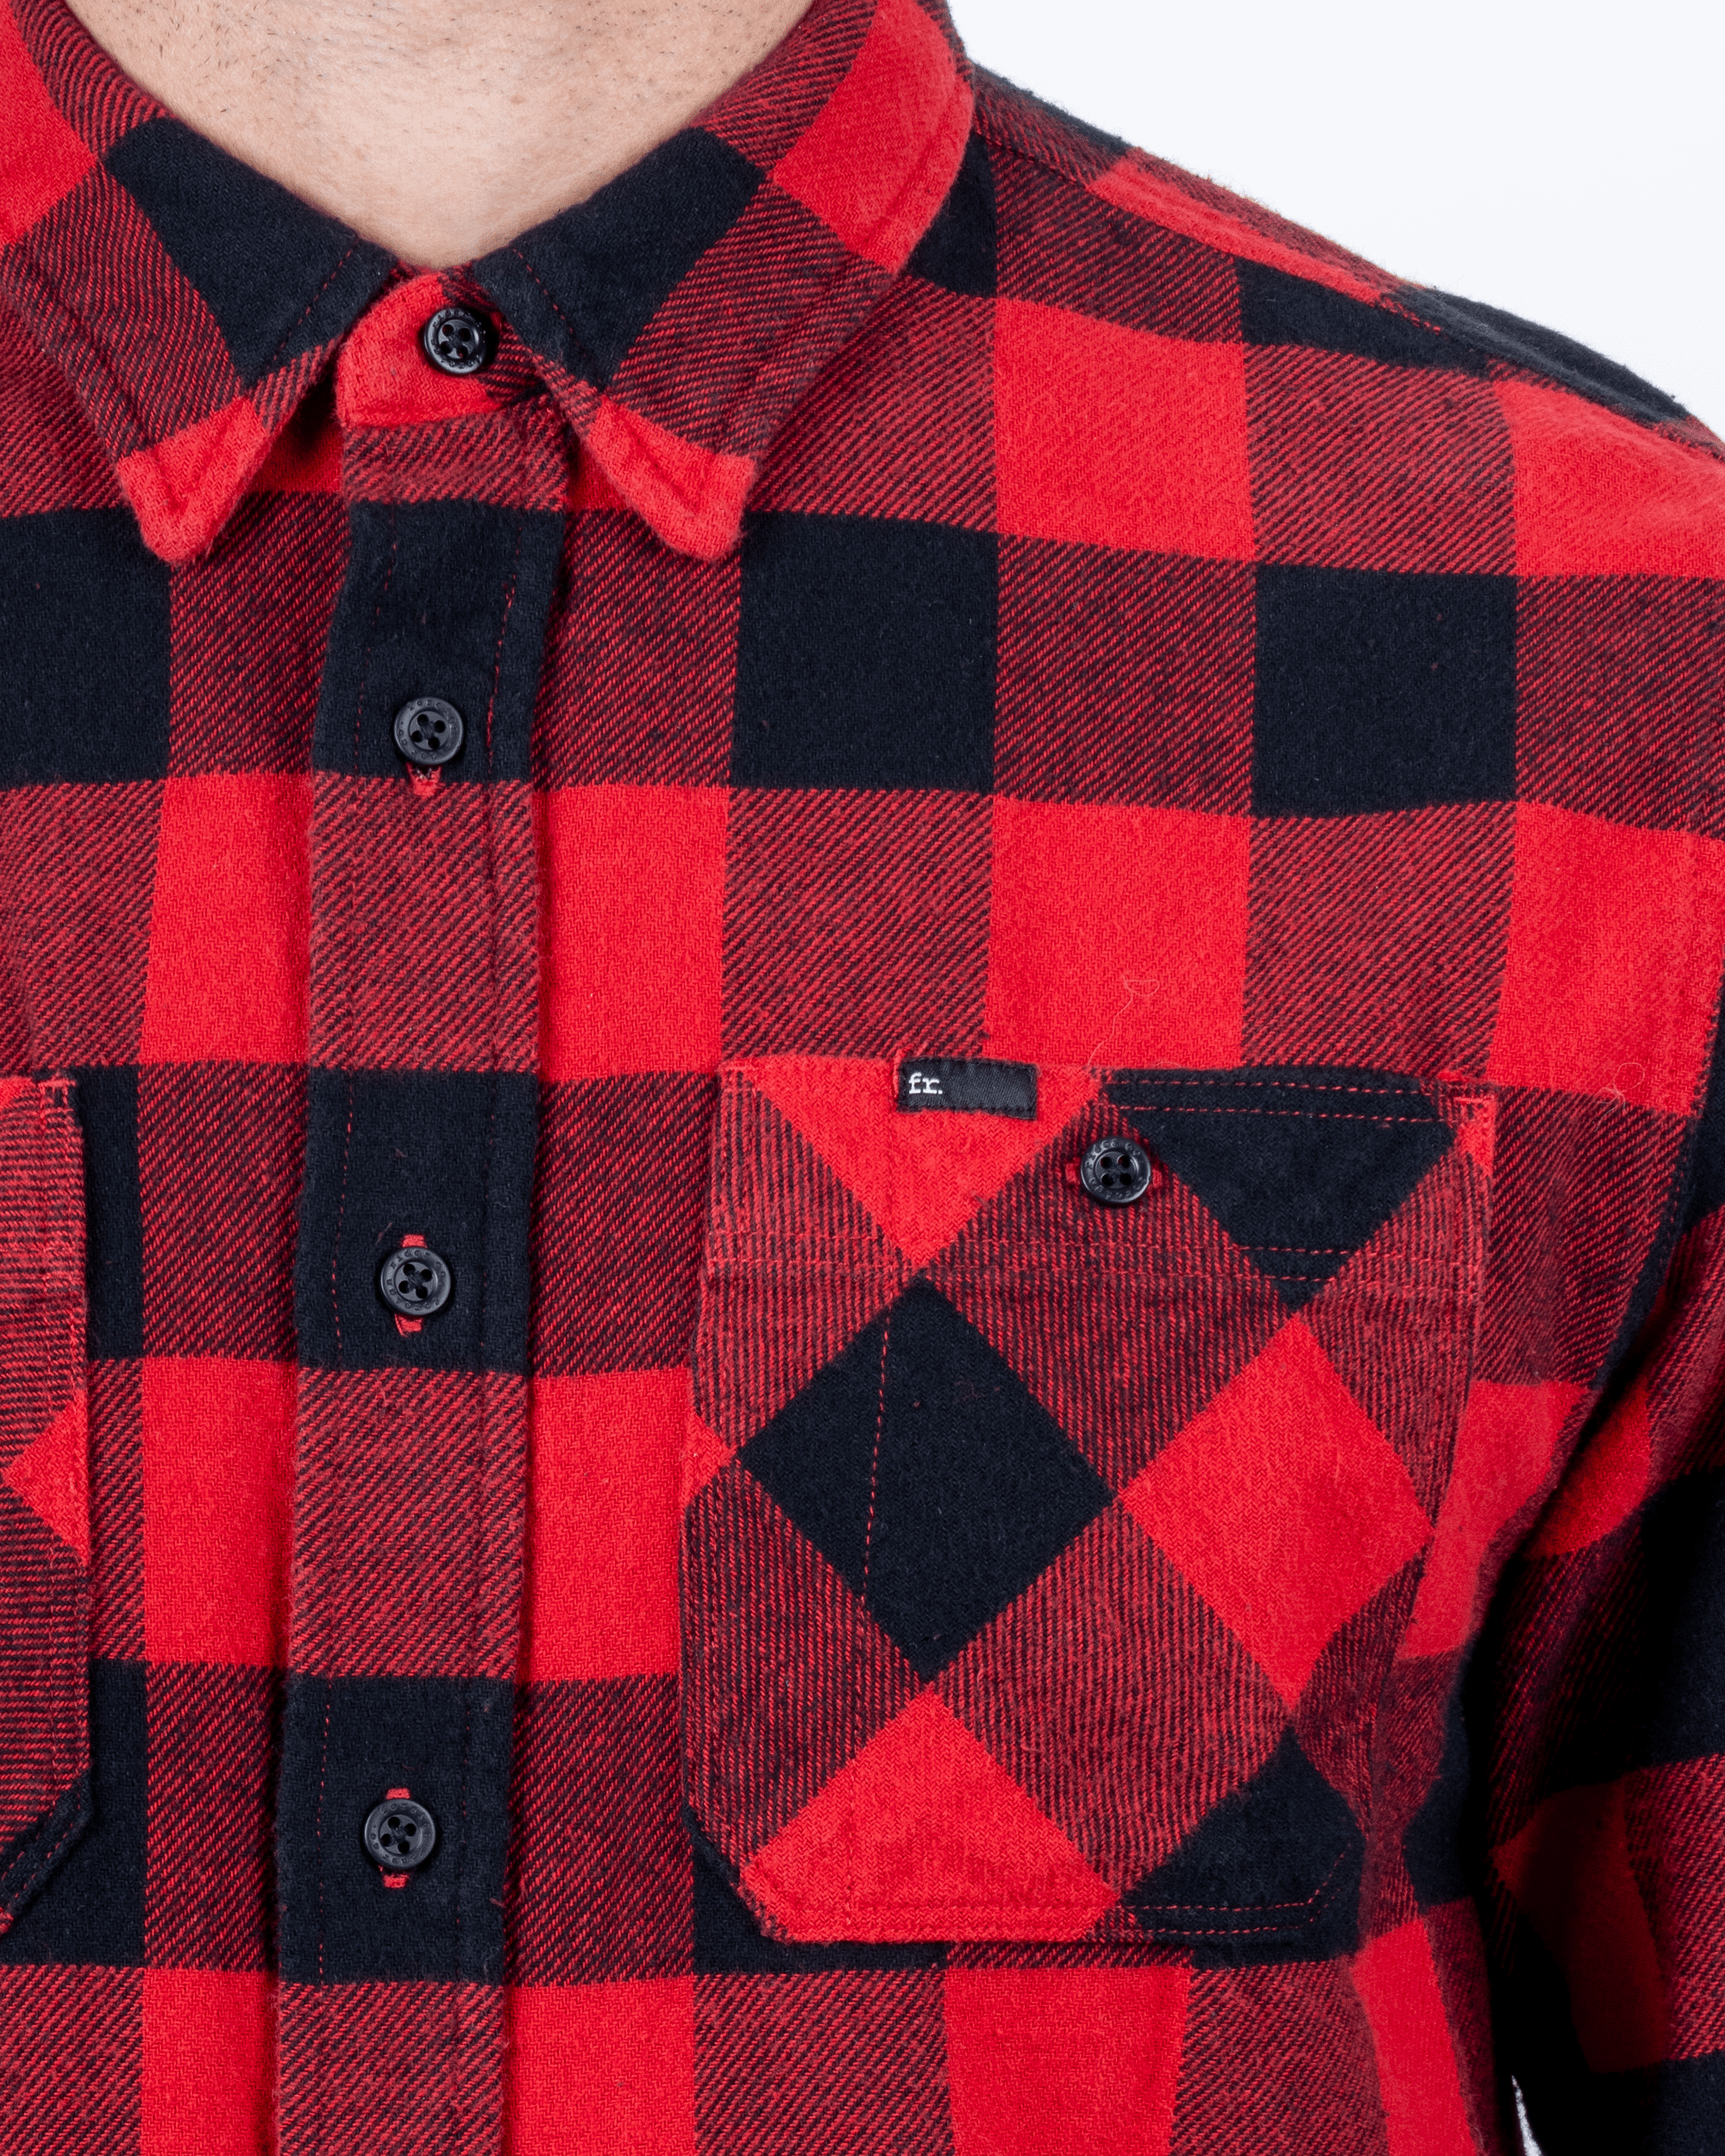 Foreign Rider Co Organic Cotton Red Flannel Plaid 01 Long Sleeve Button Up Shirt Button Chest Pocket